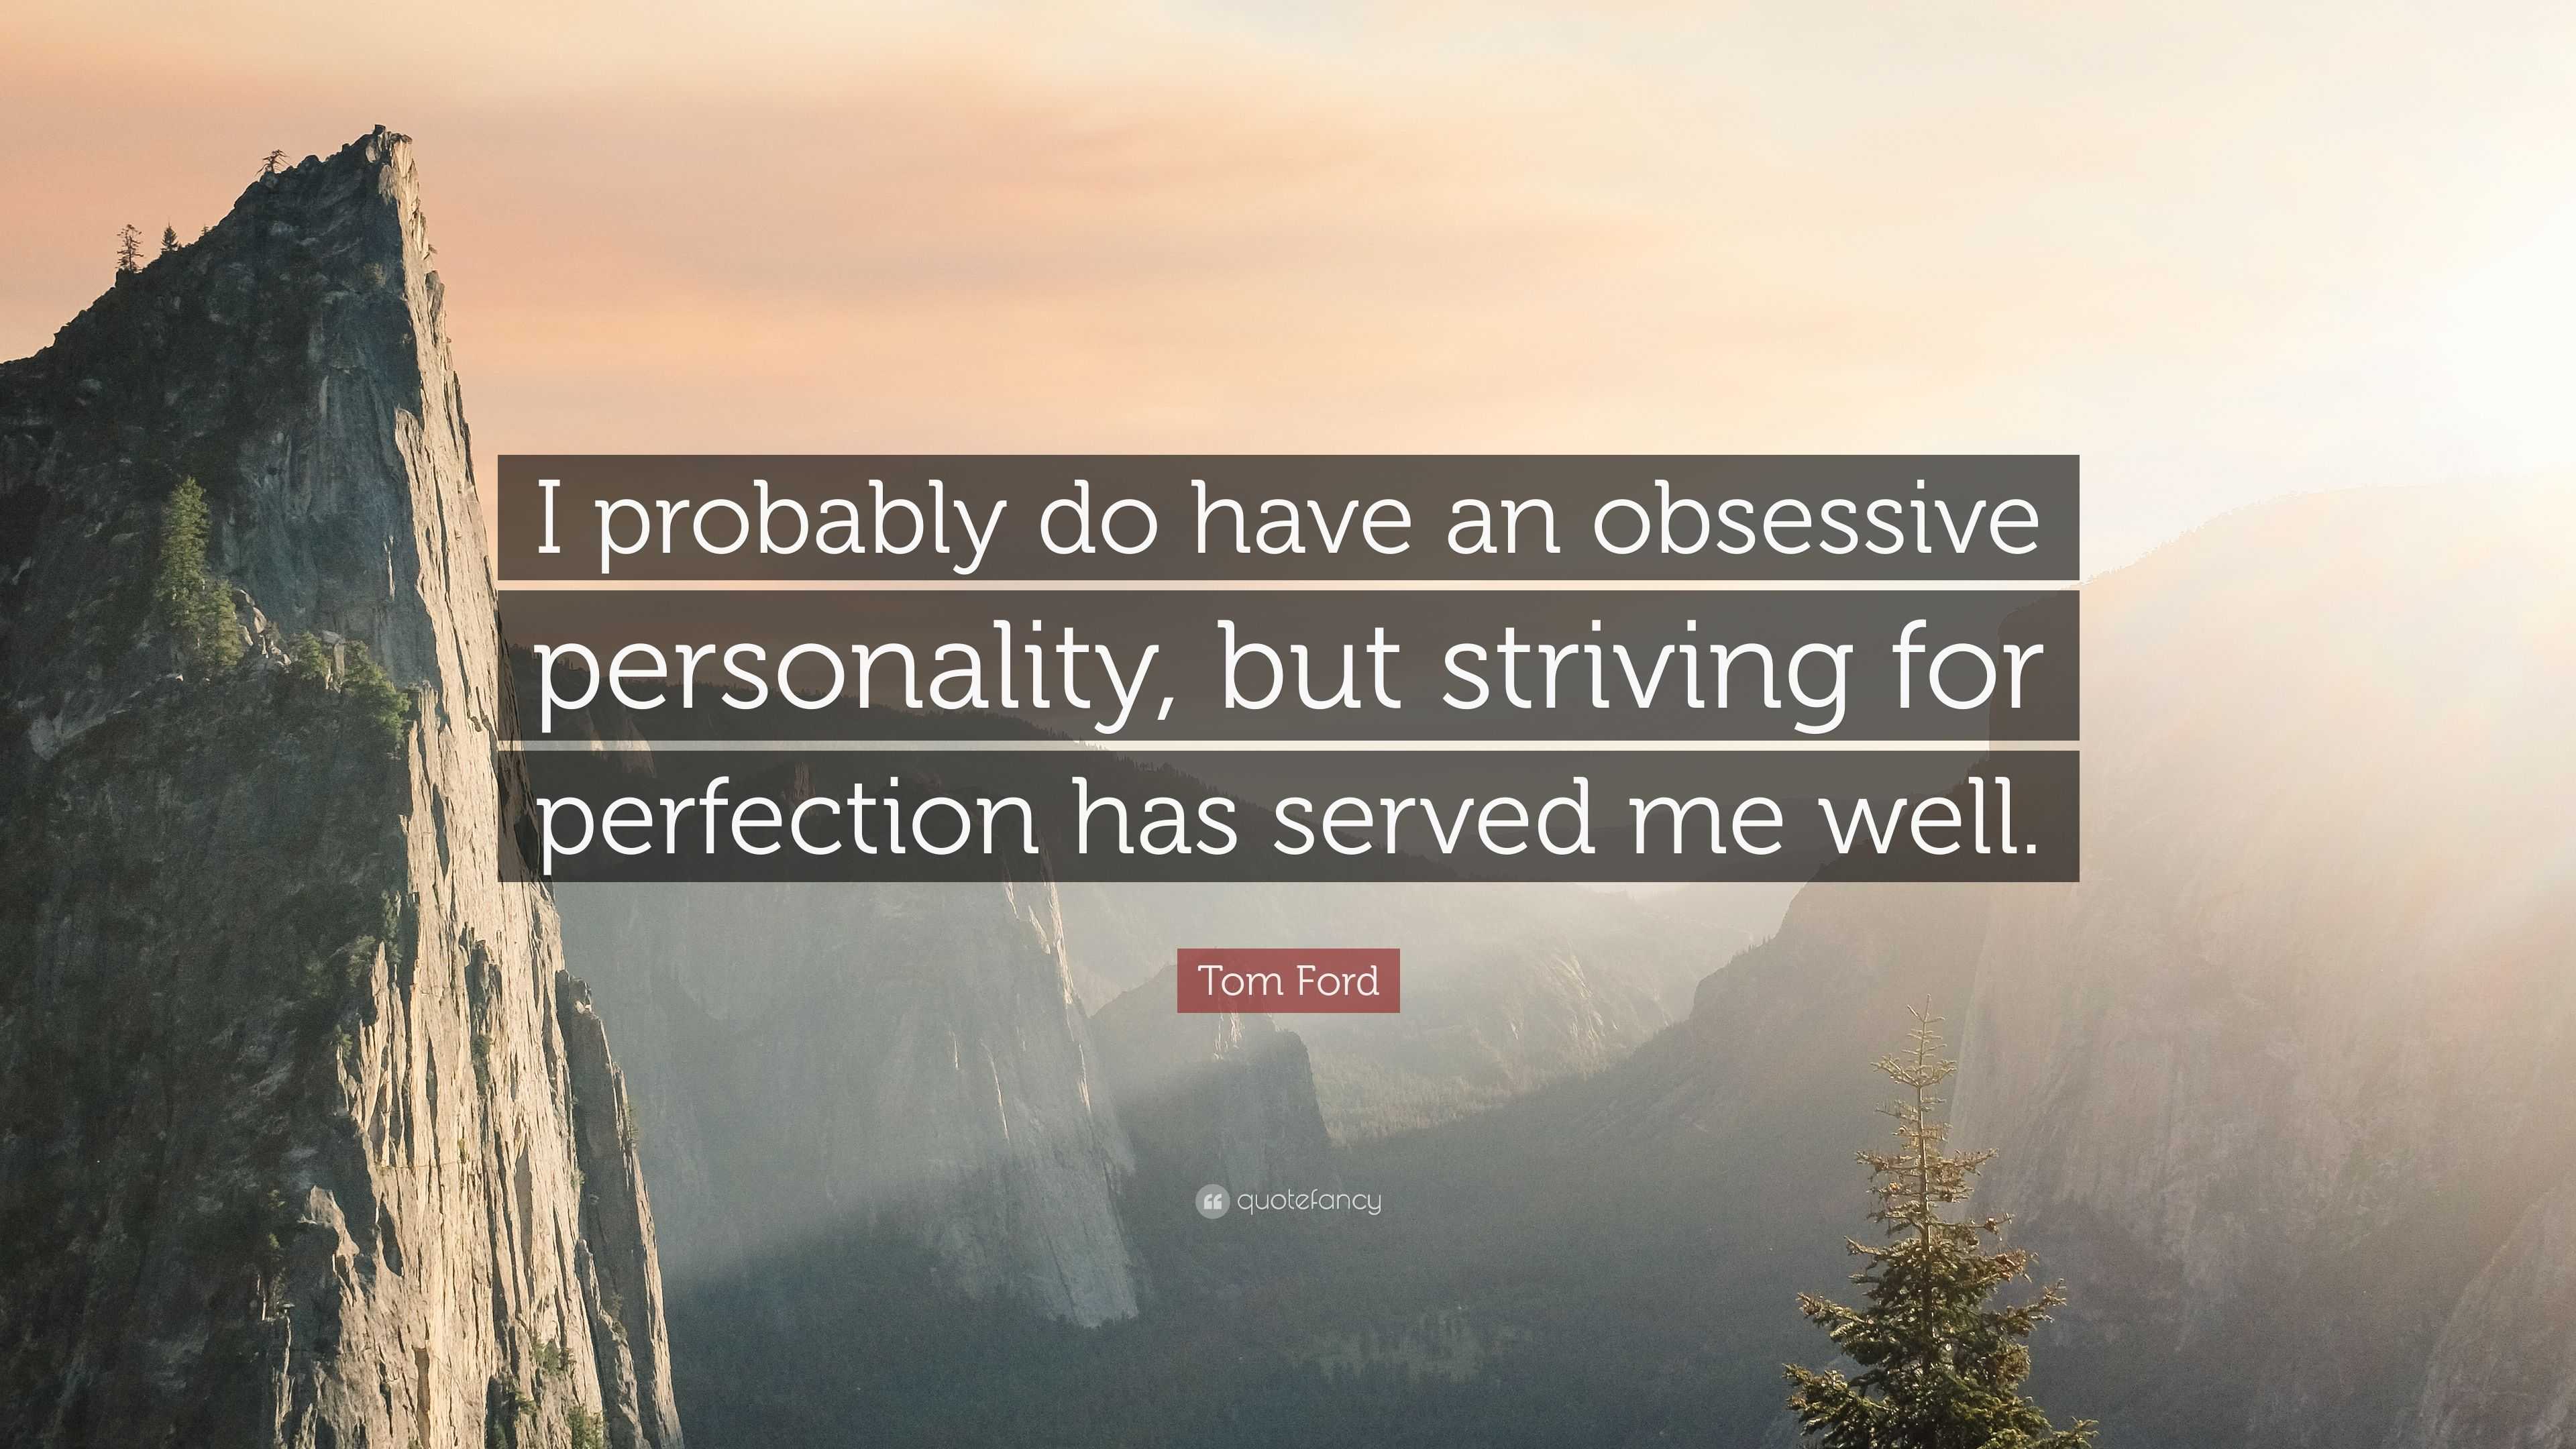 Tom Ford Quote: “I probably do have an obsessive personality, but striving  for perfection has served